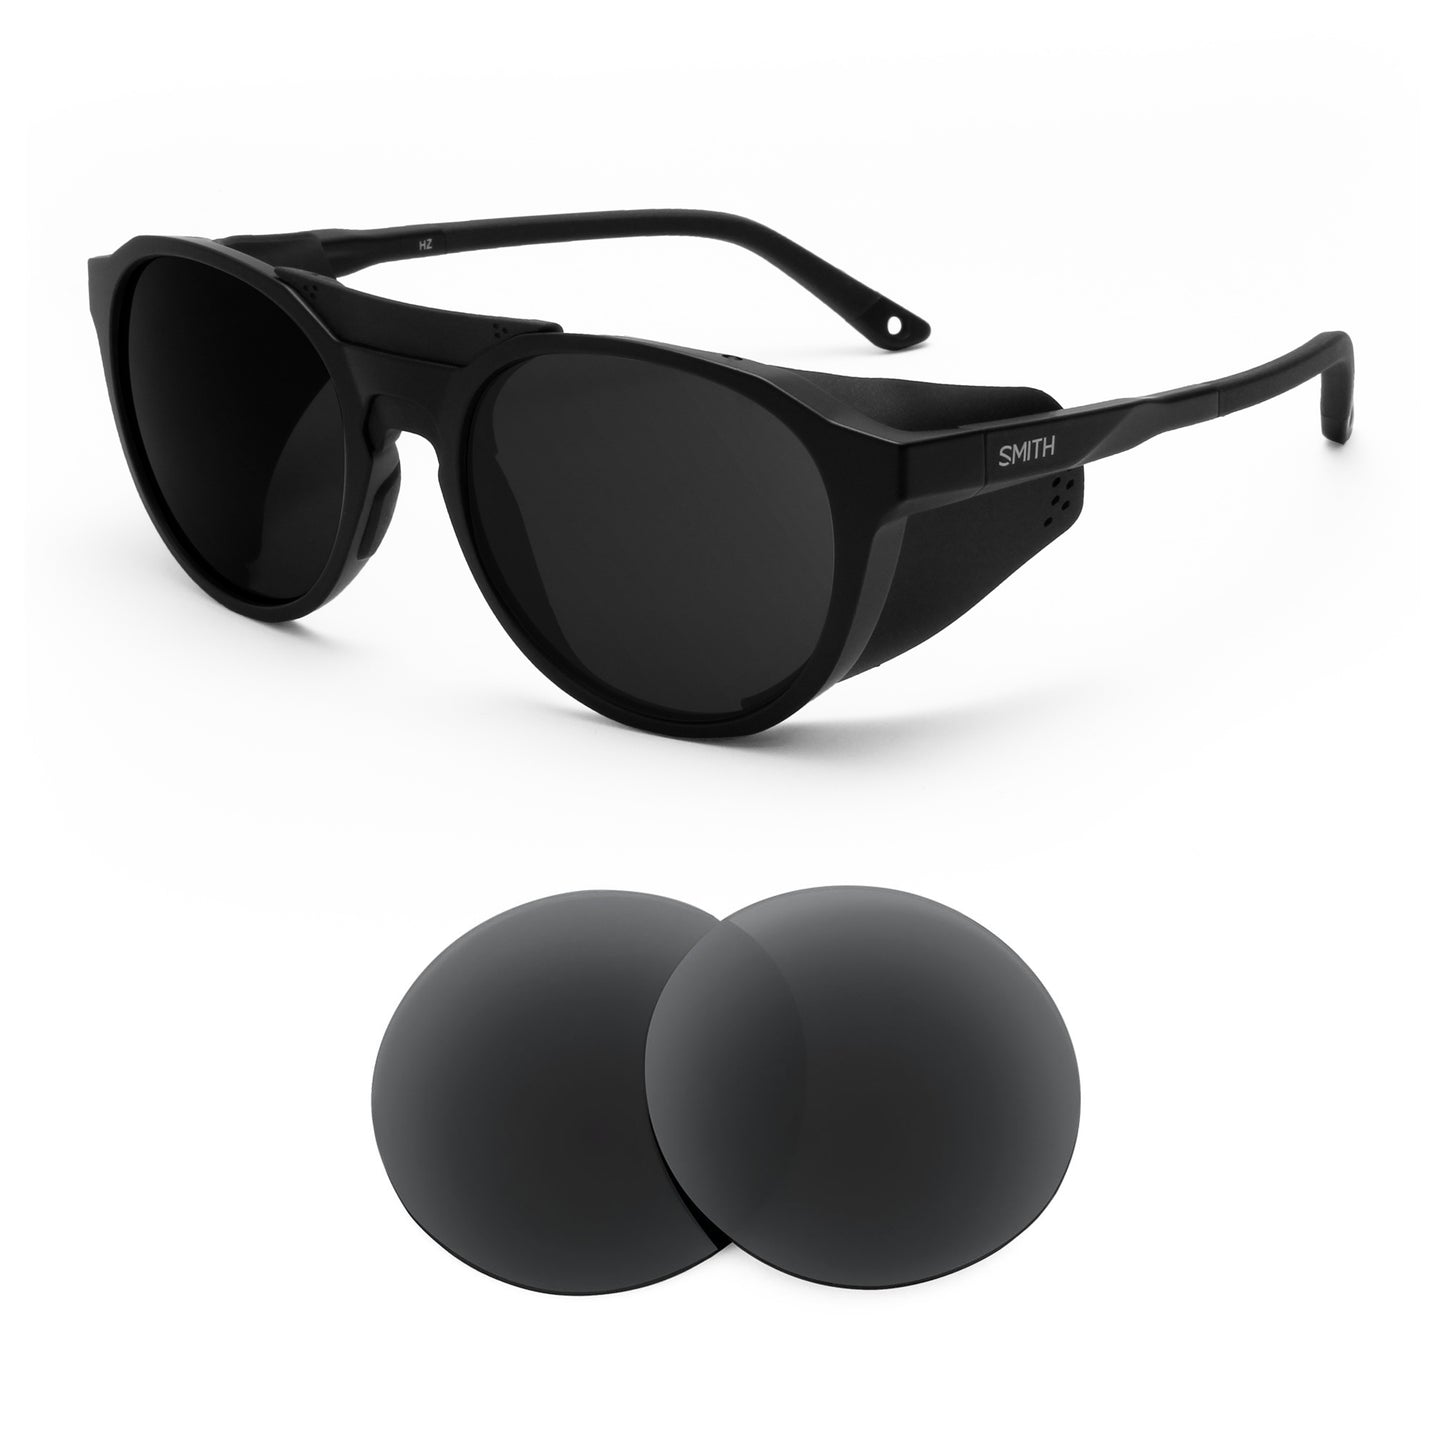 Smith Venture sunglasses with replacement lenses